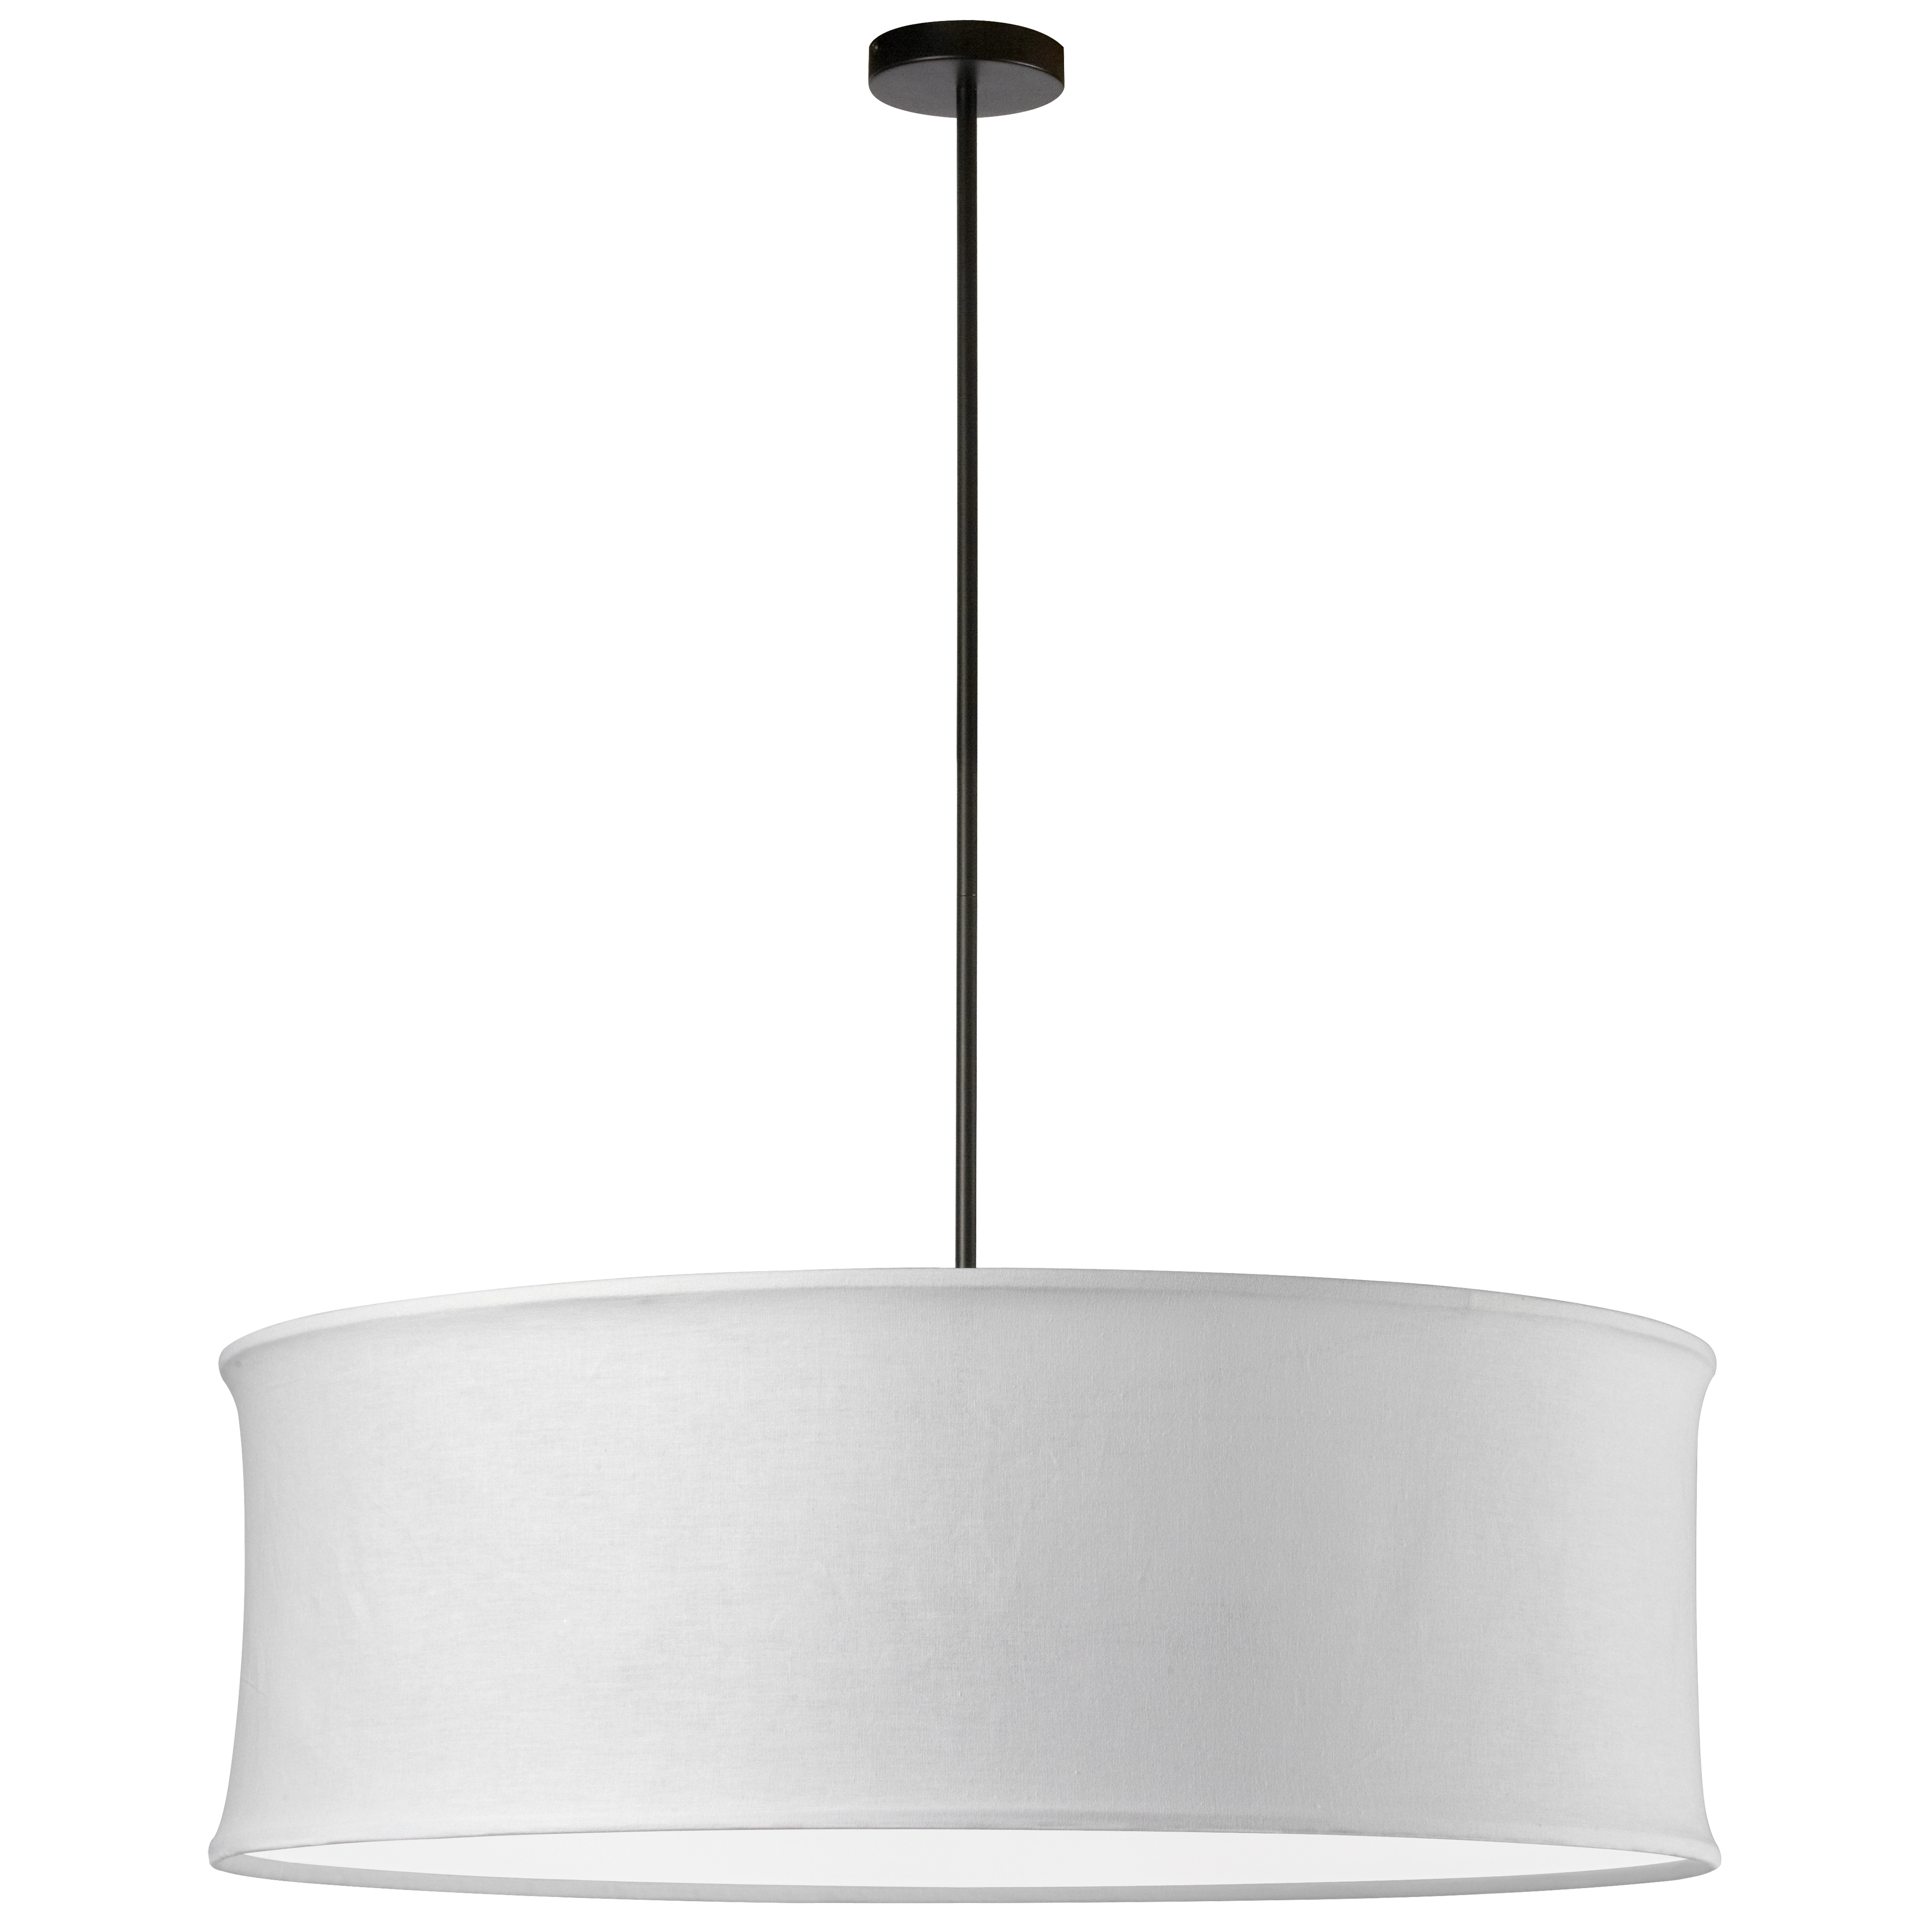 The classic drum gets a stylish update in the Philis family of lighting. With options in elegant neutral colors, Philis lighting has a timeless quality and appeal. The frame in stylish black features a straight drop to a fabric drum shade in your choice of neutrals with a slim horizontal profile. What sets Philis lighting apart is a beveled edge at the top and bottom of the drum, with a slightly tapered silhouette. It gives the Philis family of lighting an ageless appeal that will easily blend into virtually any décor scheme.